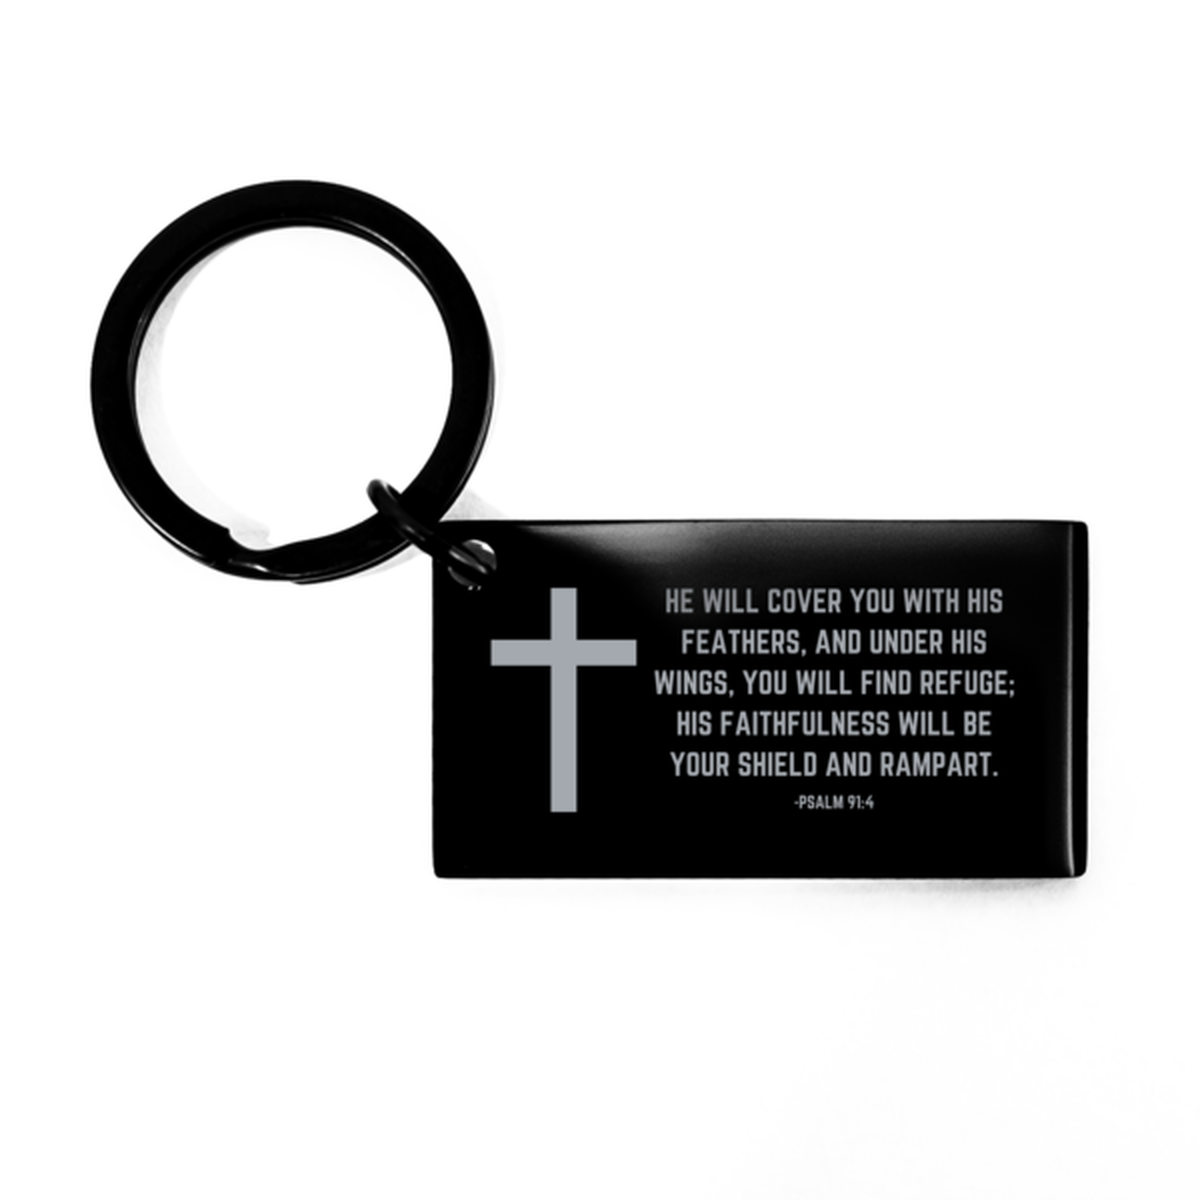 Baptism Gifts For Teenage Boys Girls, Christian Bible Verse Black Keychain, He will cover you with his feathers, Confirmation Gifts, Bible Verse Keyring for Son, Godson, Grandson, Nephew